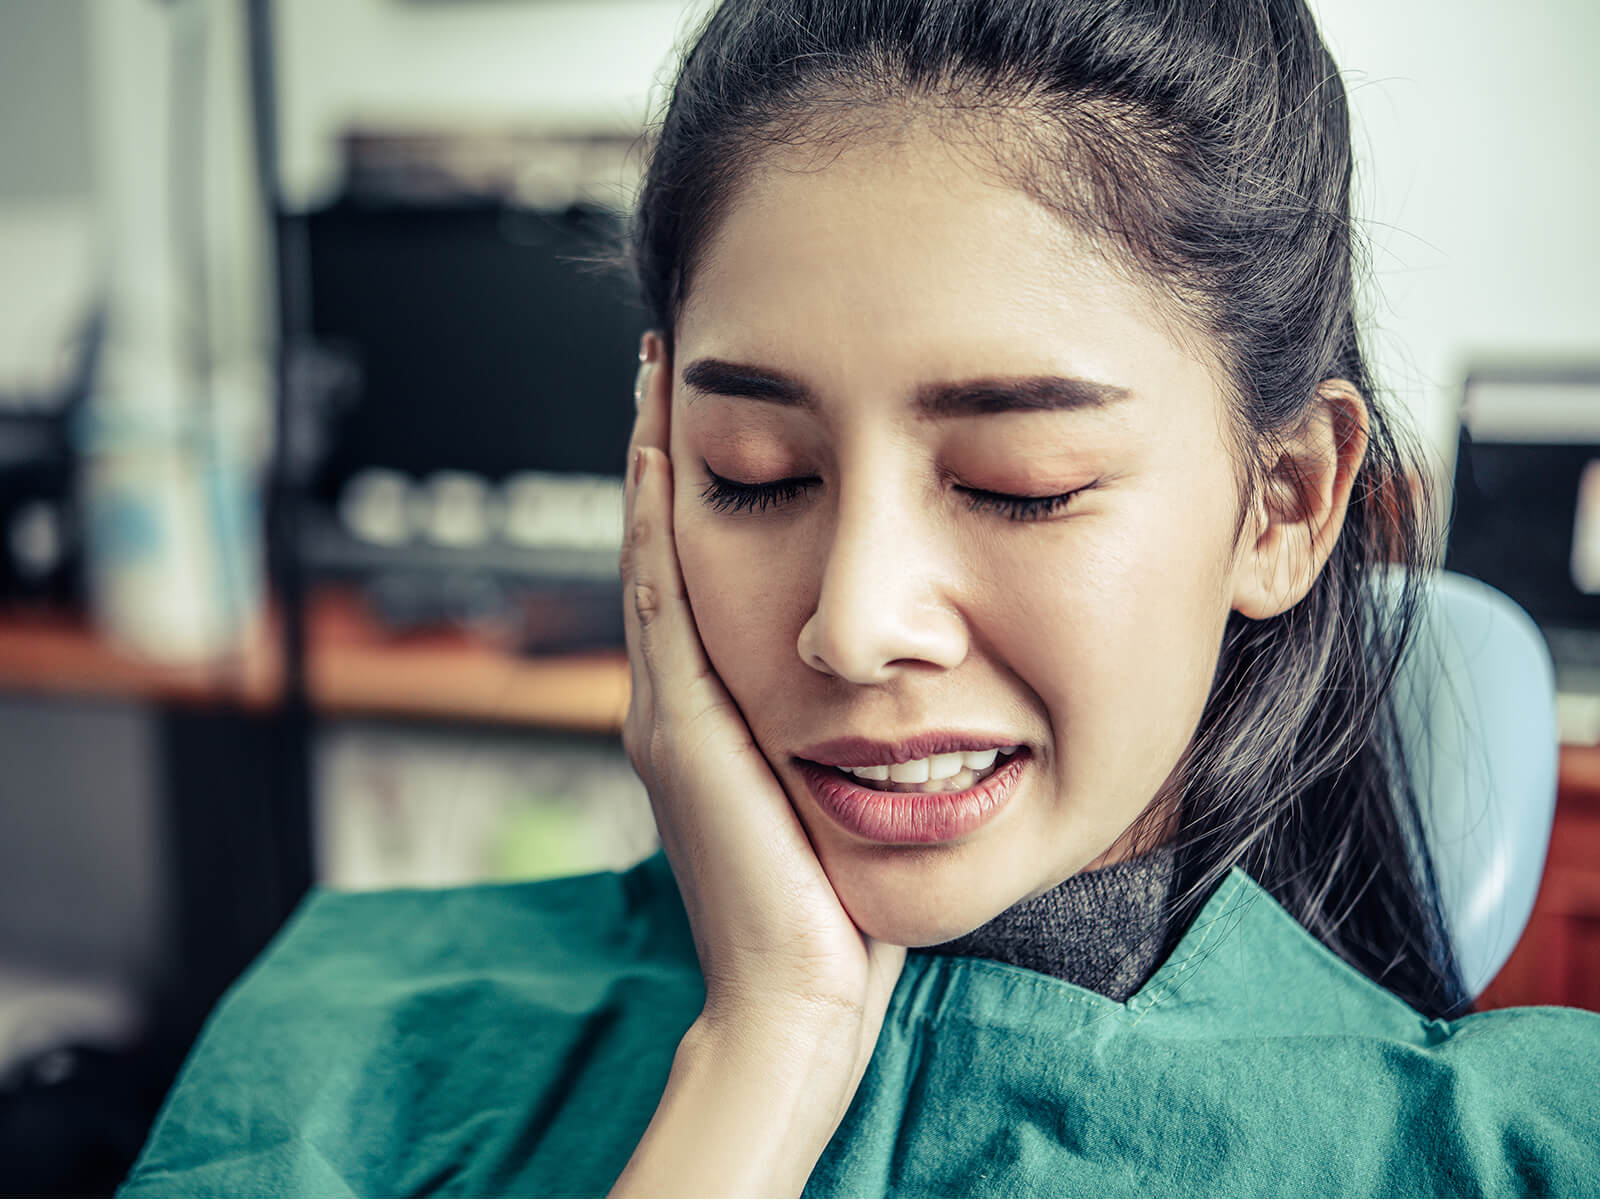 What Are Impacted Wisdom Teeth And Why Remove Them?